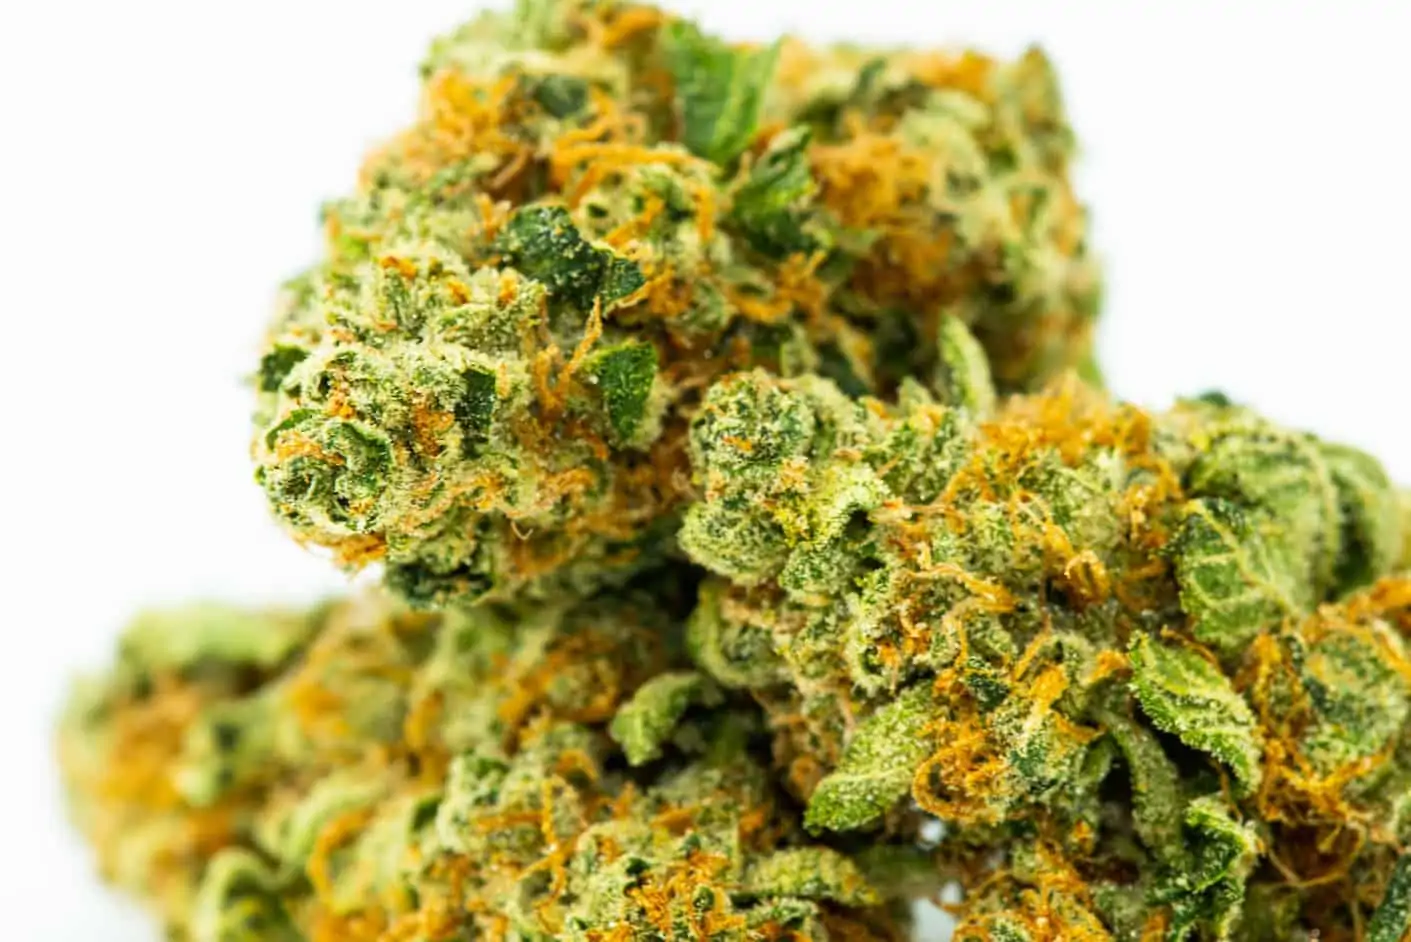 Dosi Cake Weed Strain Review & Information